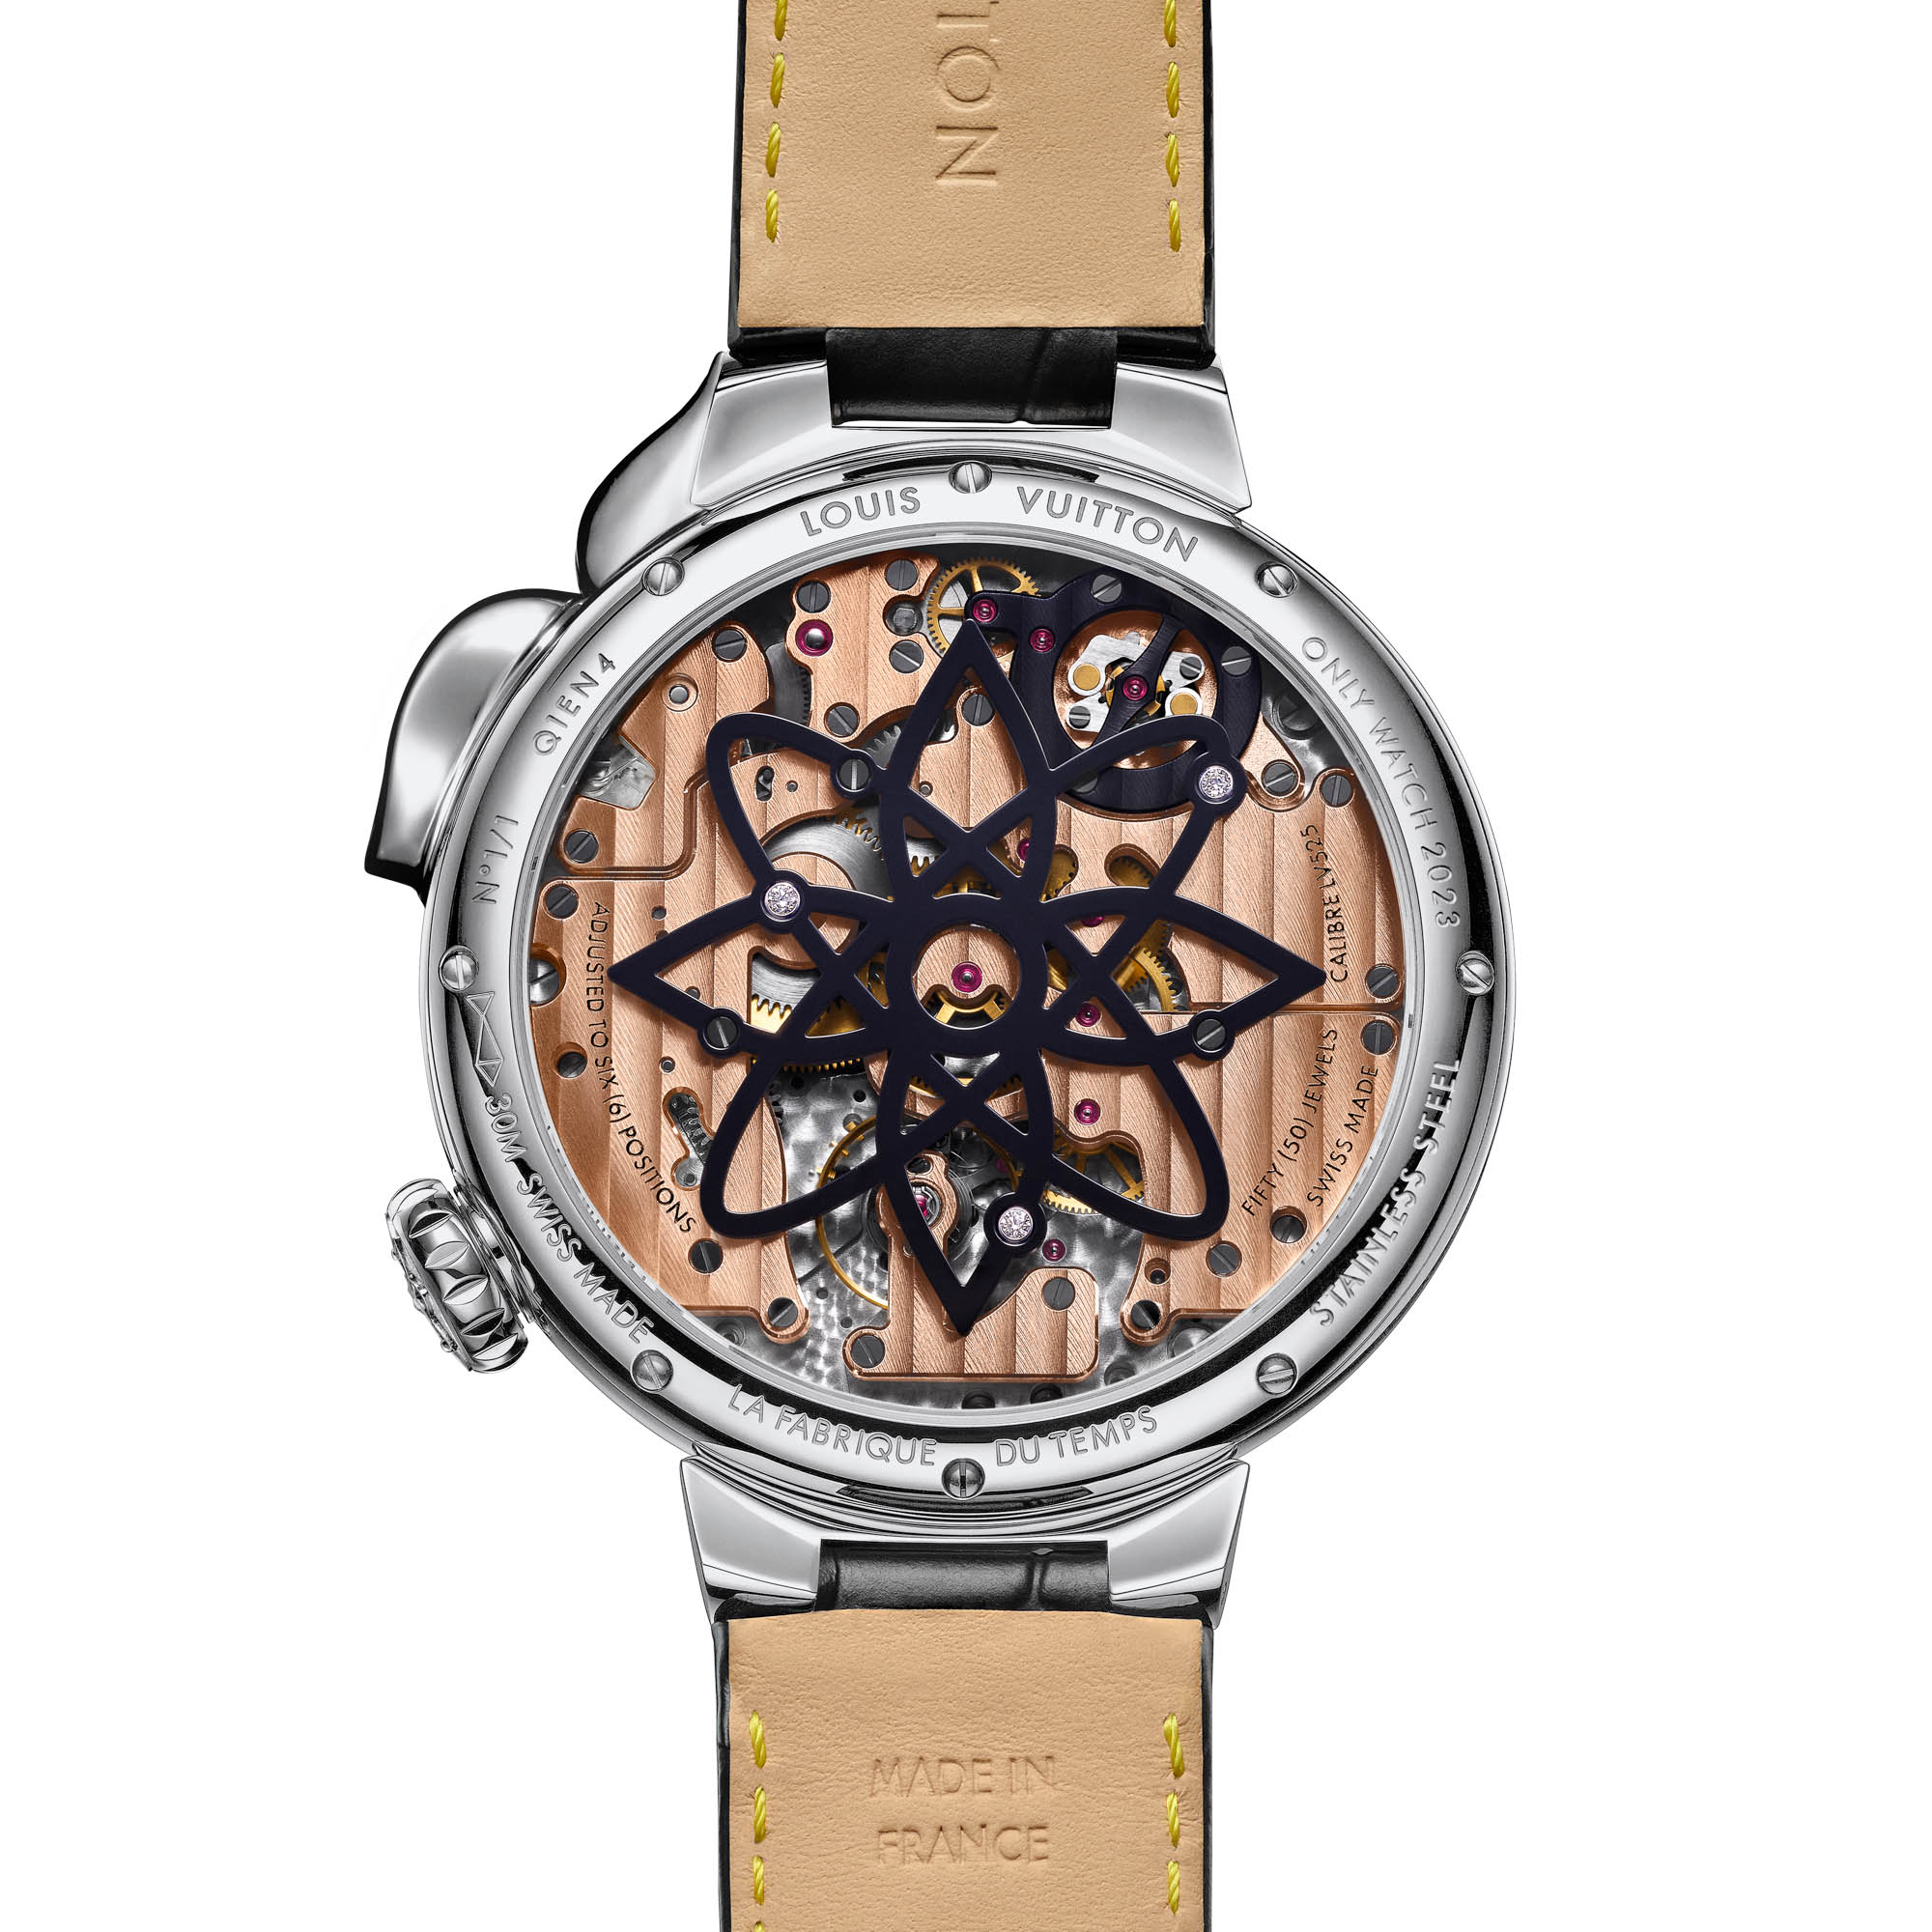 Louis Vuitton - Sirius 70 – Every Watch Has a Story